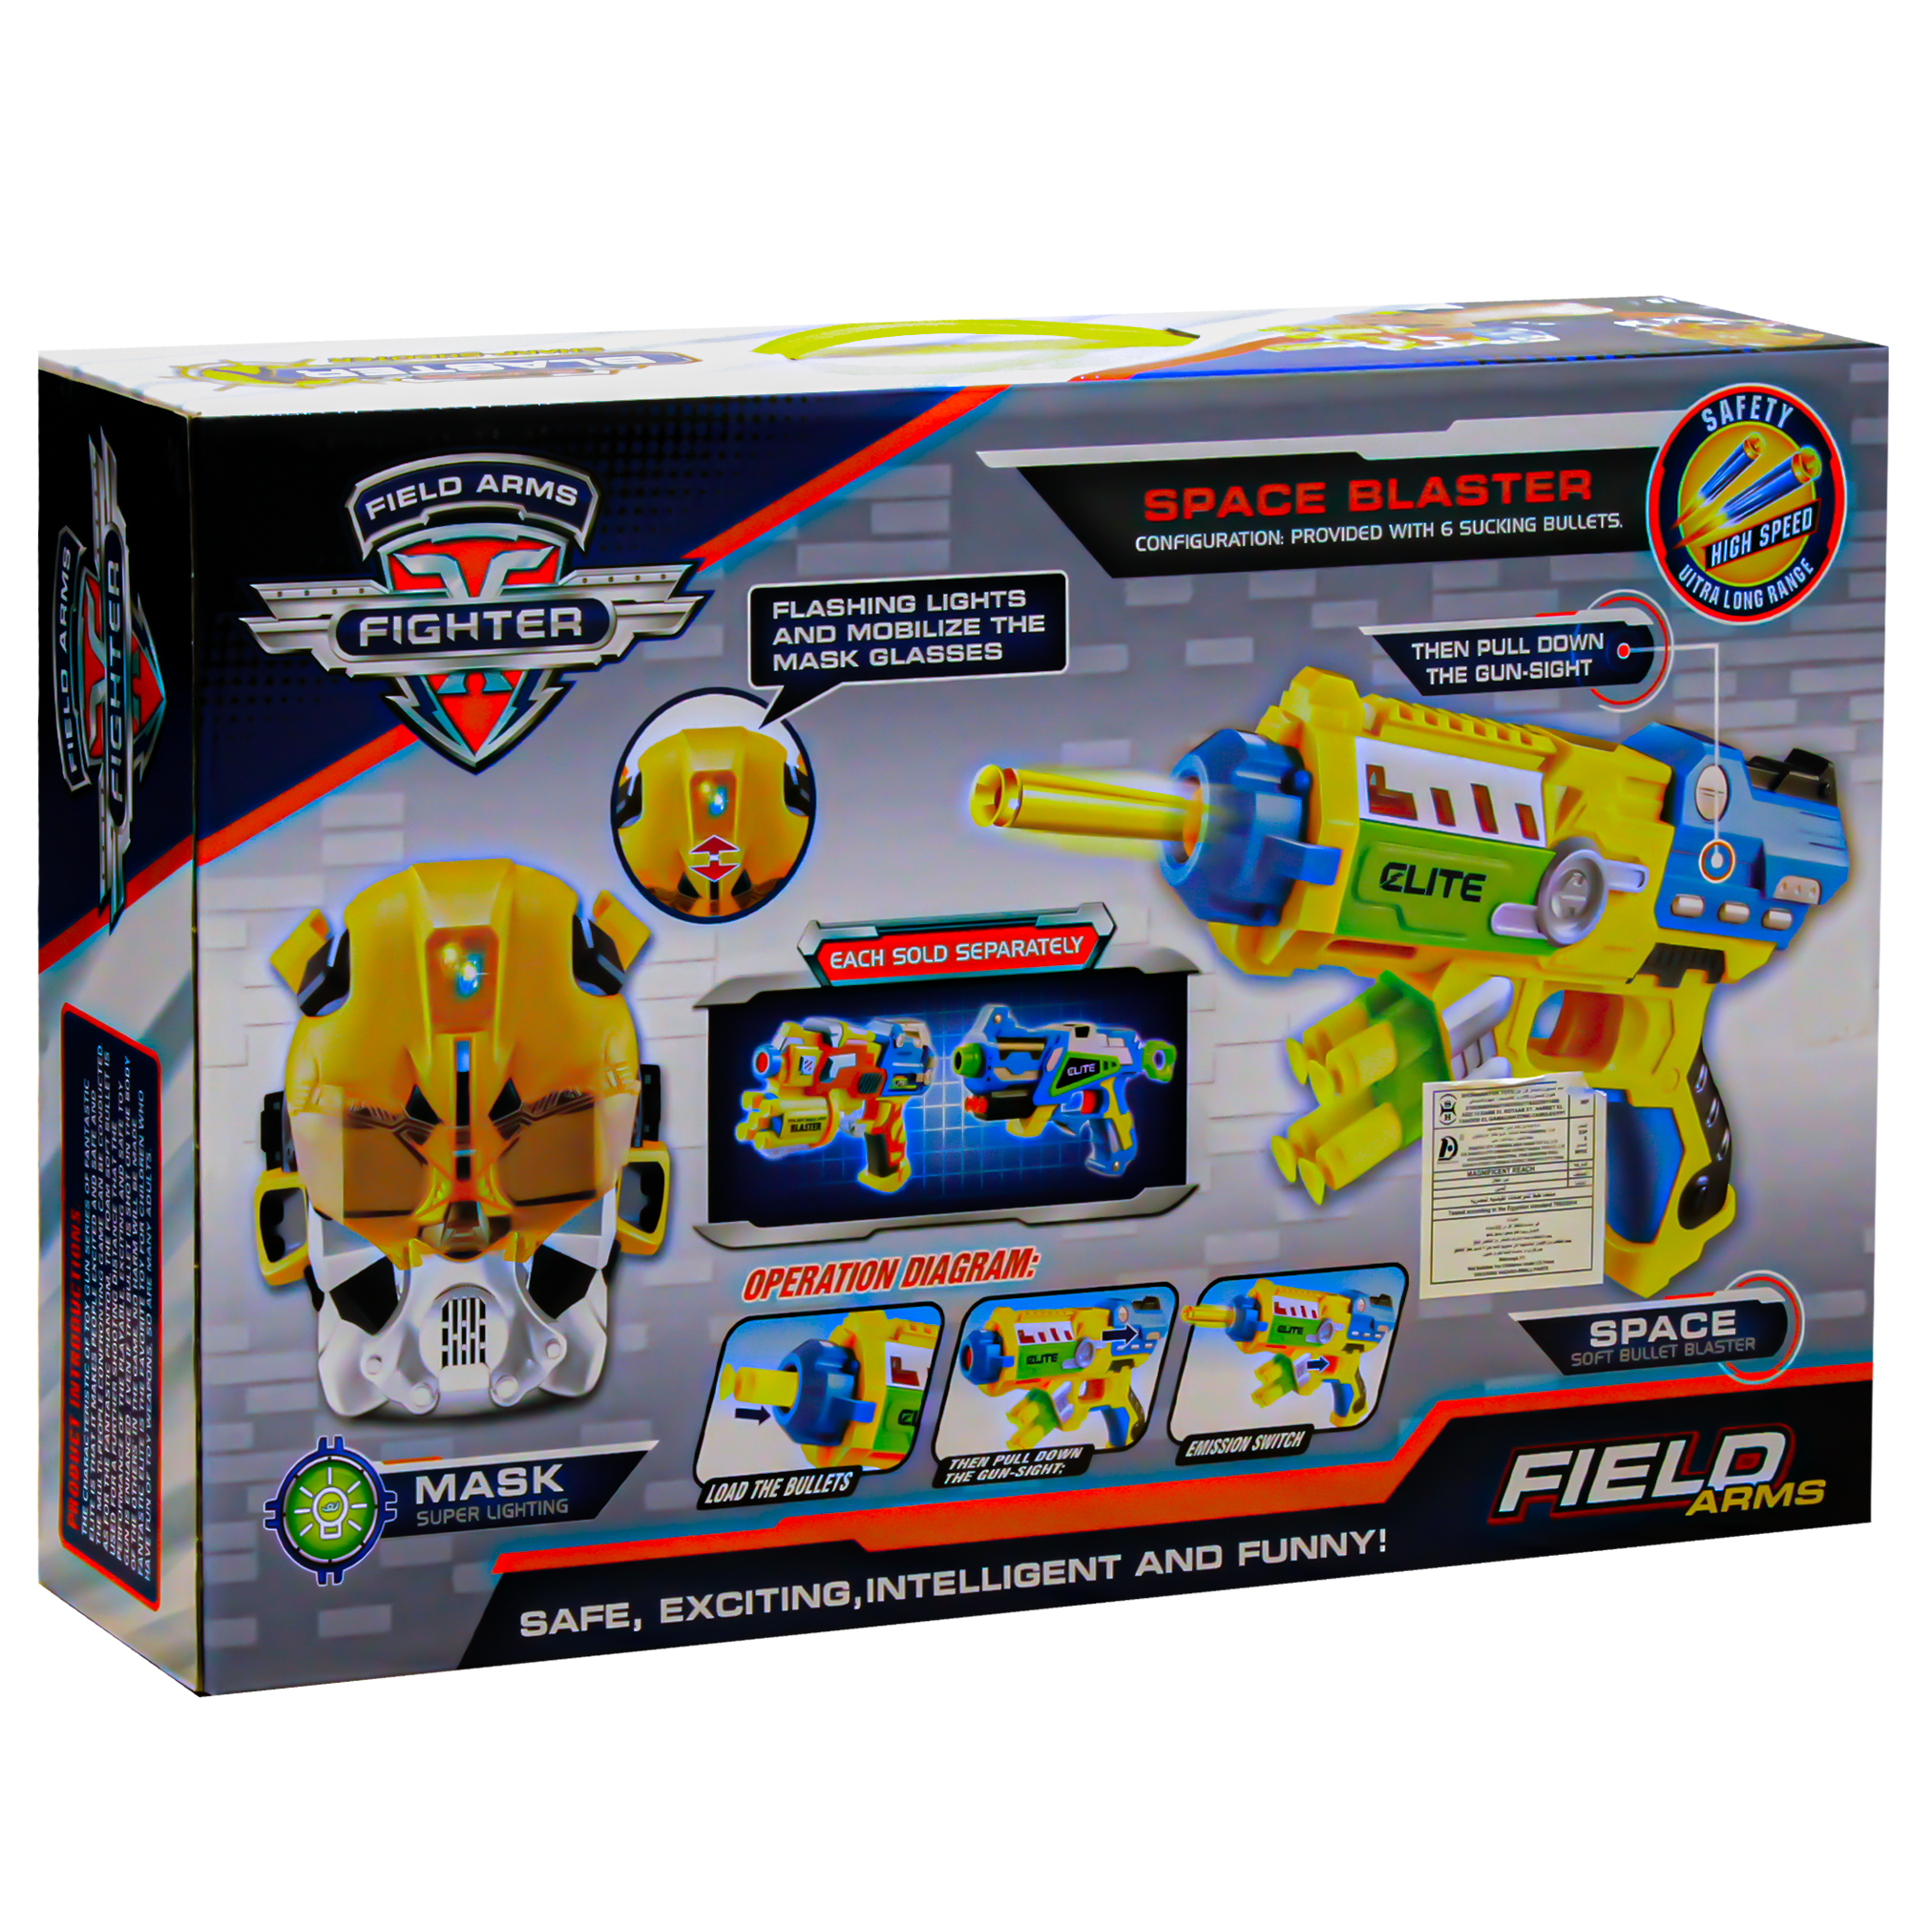 FIELD ARMS FIGHTER SPACE SOFT BULLET BLASTER SHARP SHOOTER WITH FACE MASK Guns & Darts